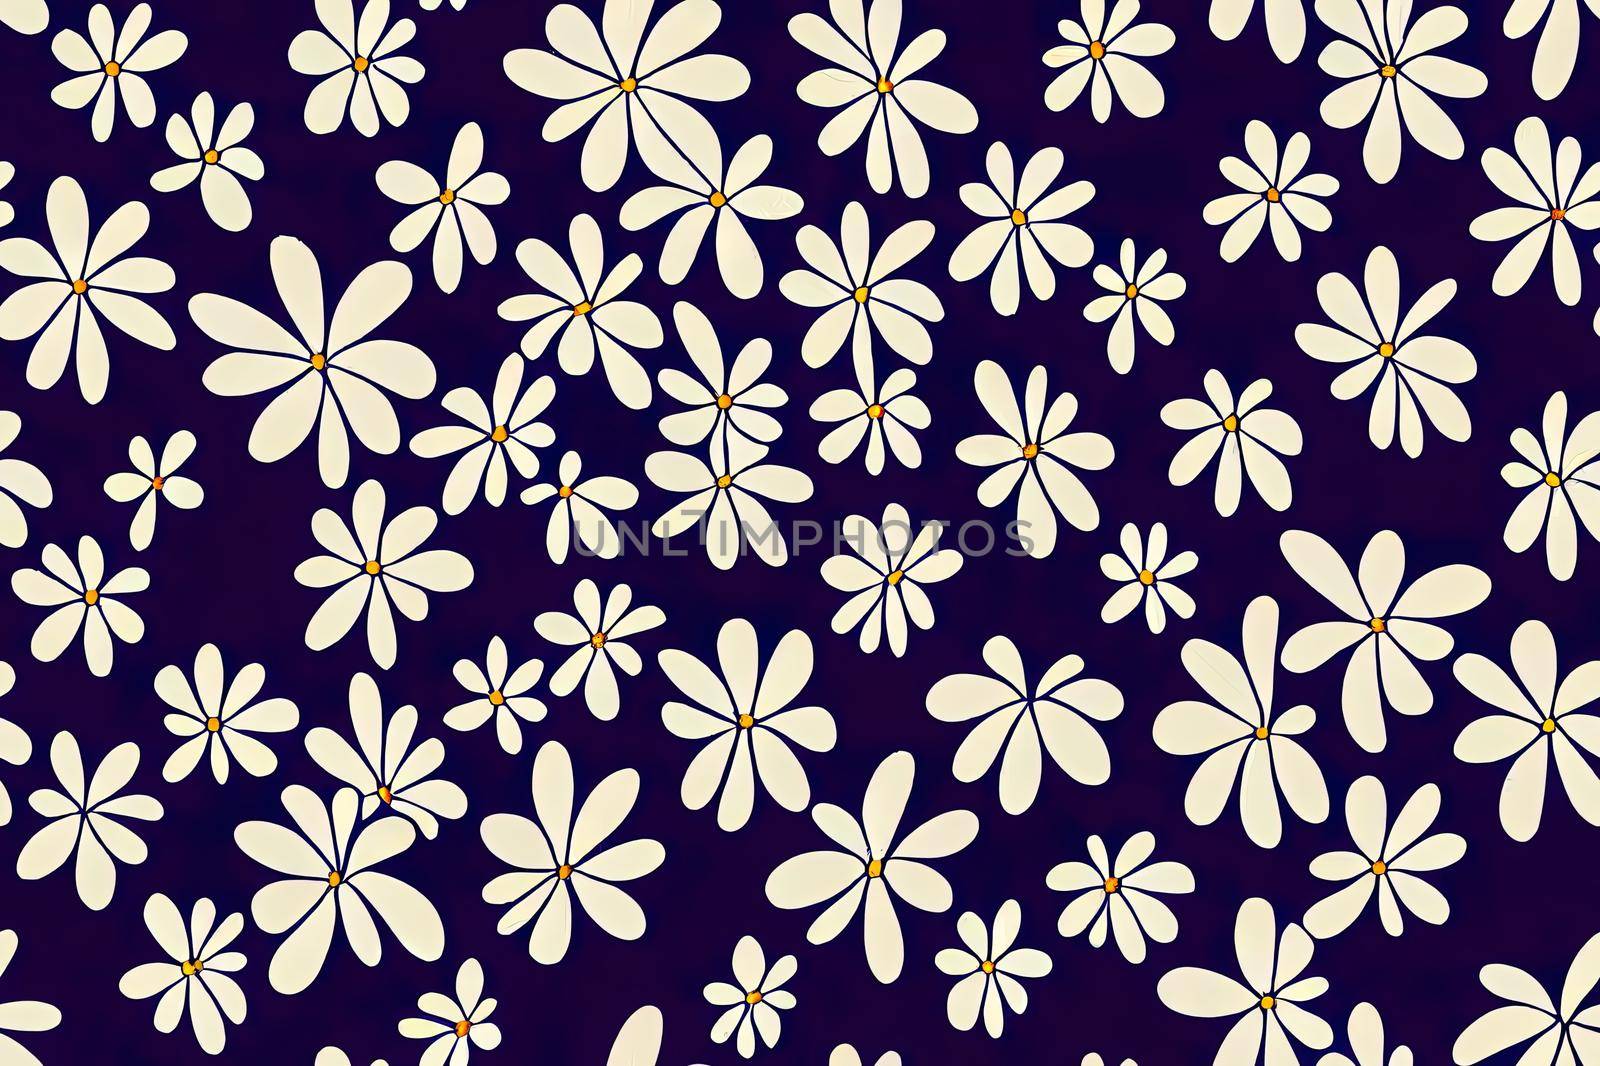 Ditsy liberty style seamless patterns. Set of summer daisy High quality 2d illustration. by 2ragon